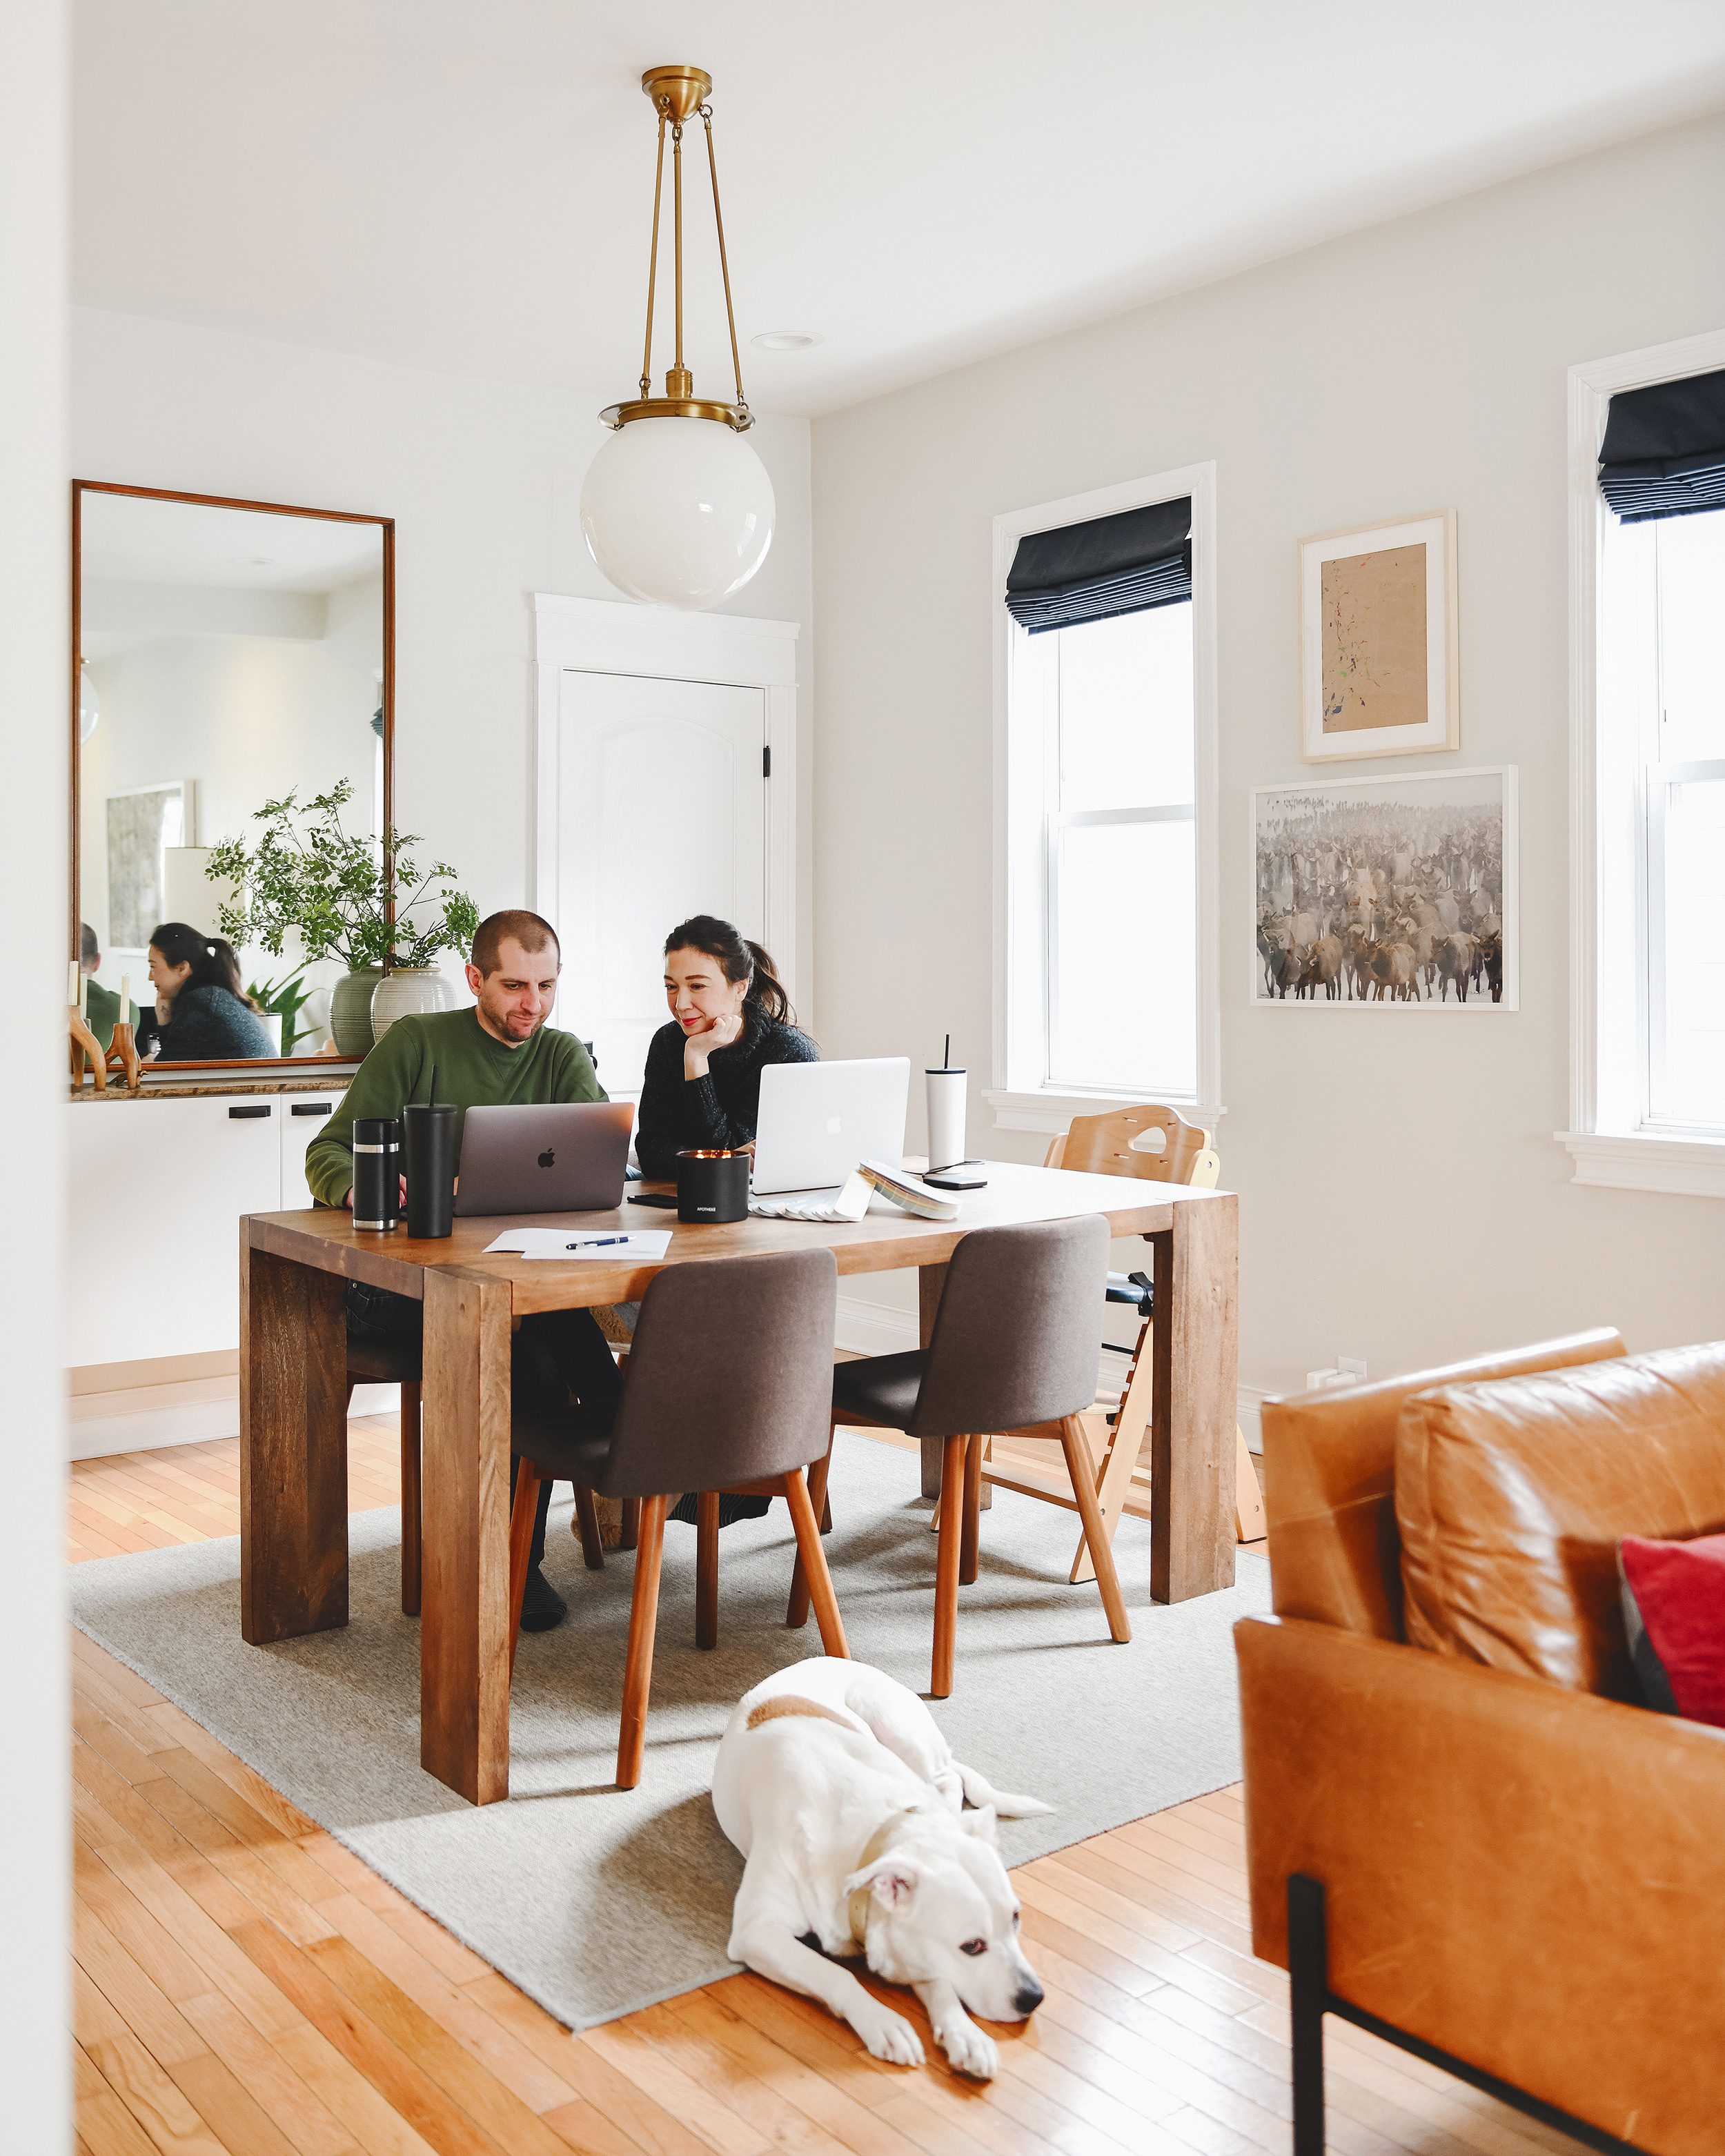 Kim and Scott work from the dining room table while Catfish the dog naps on the rug // via yellow brick home